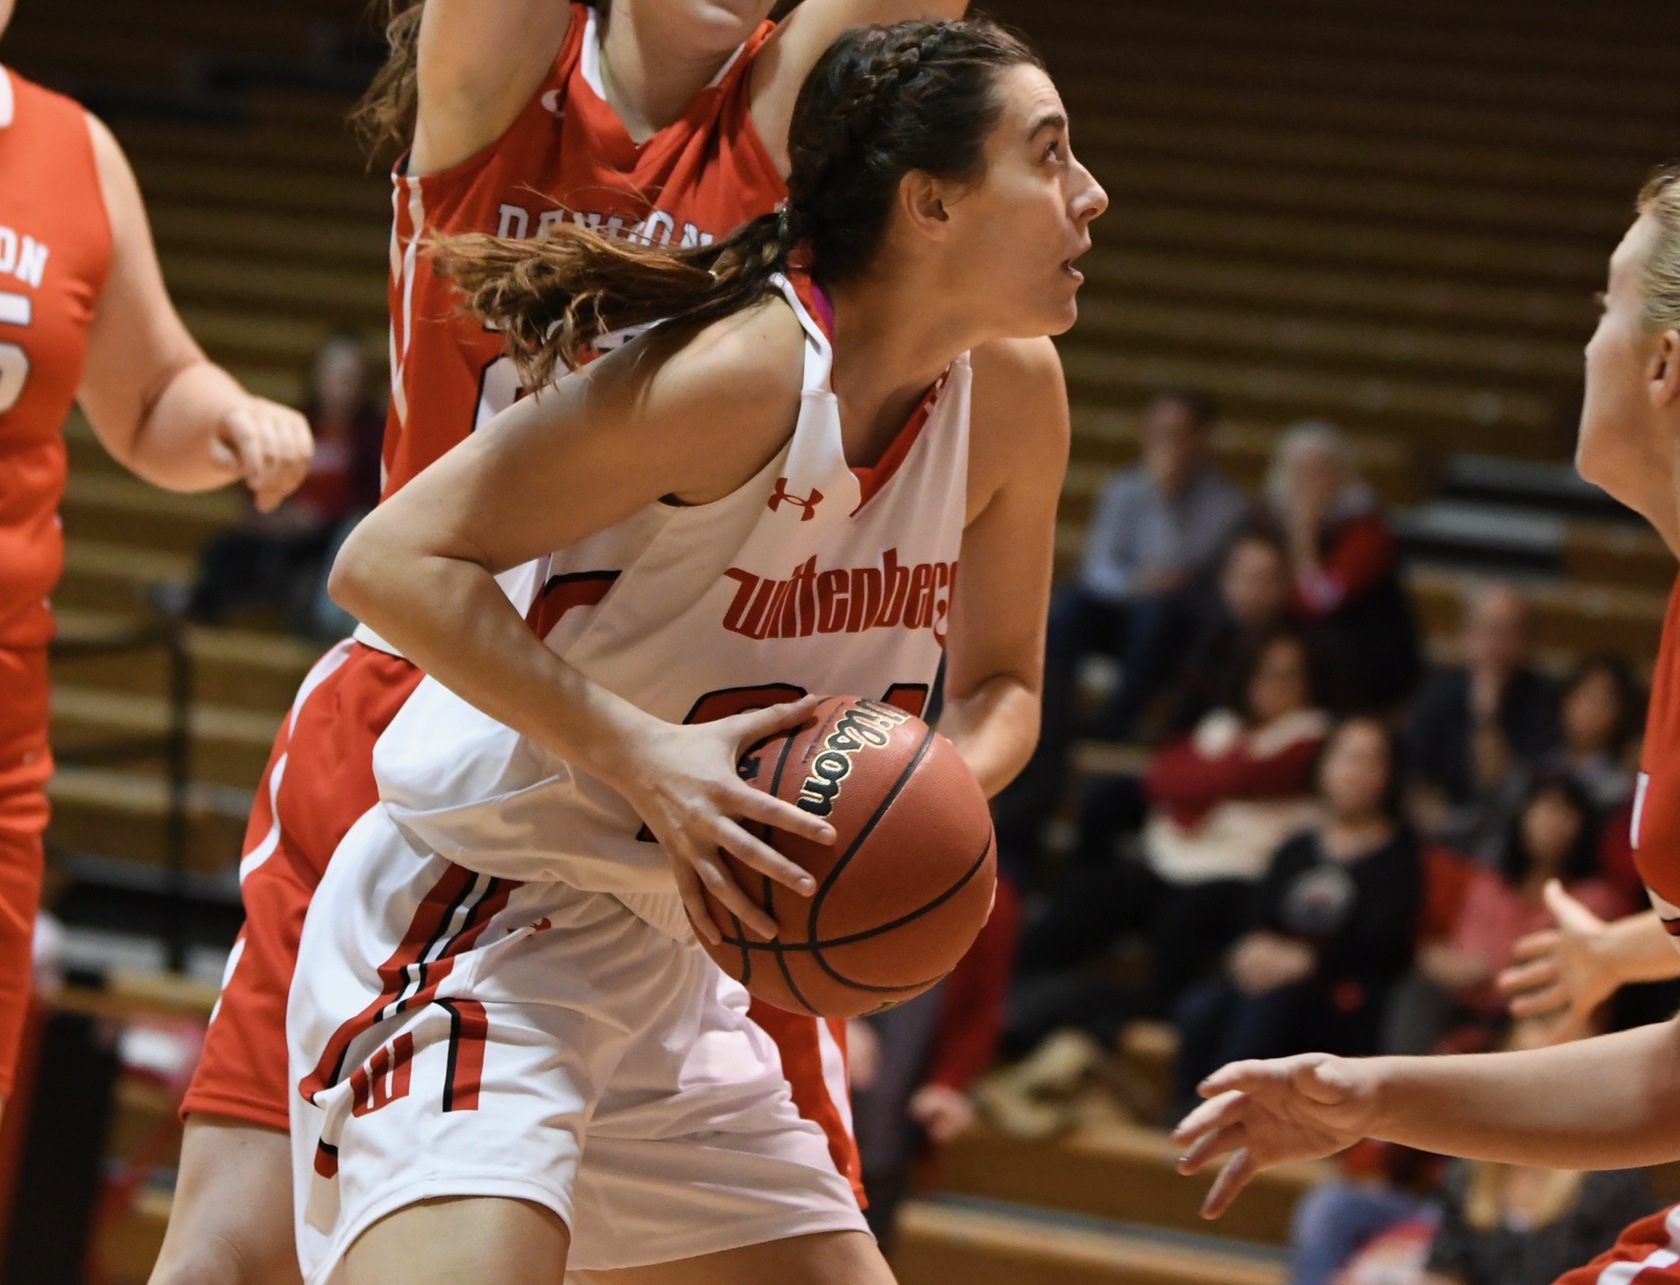 Junior Korynne Berner posted her 1st-career double-double with 14 points and 11 rebounds in Wittenberg's 56-45 home win over Ohio Wesleyan